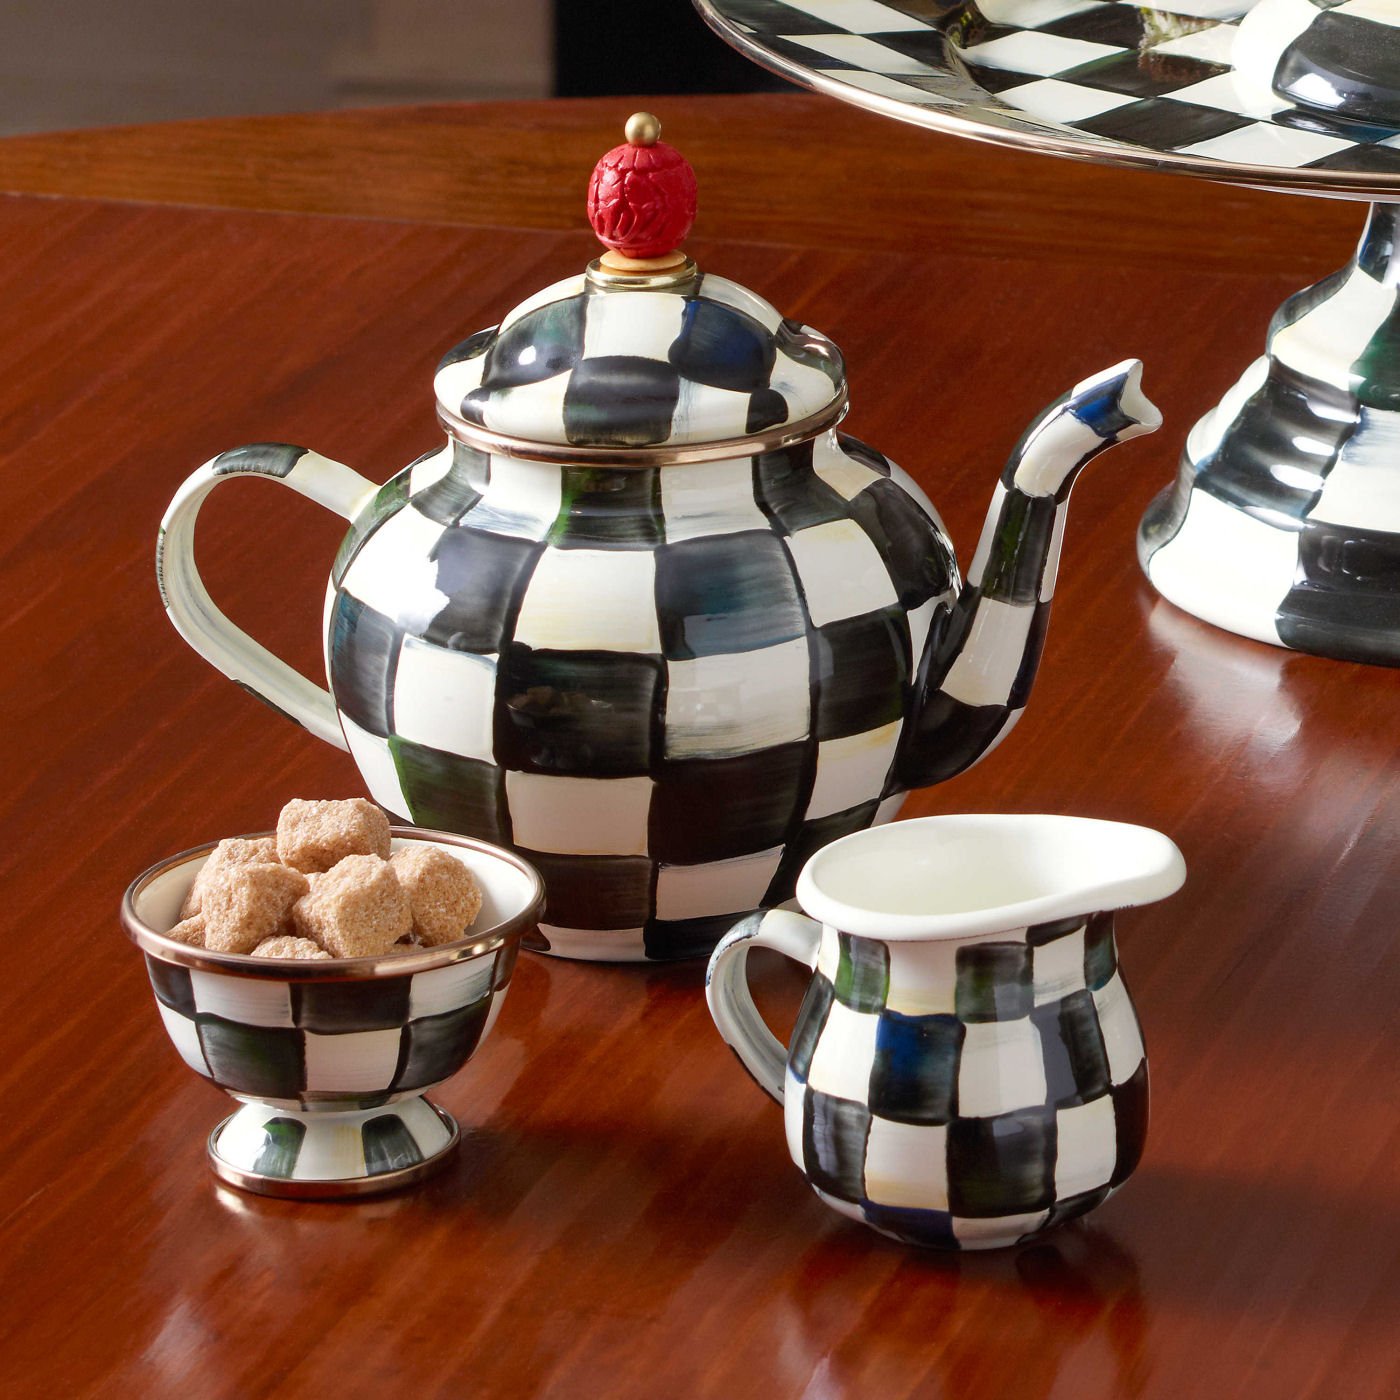 MacKenzie-Childs Courtly Check Little Creamer - |VESIMI Design| Luxury Bathrooms and Home Decor